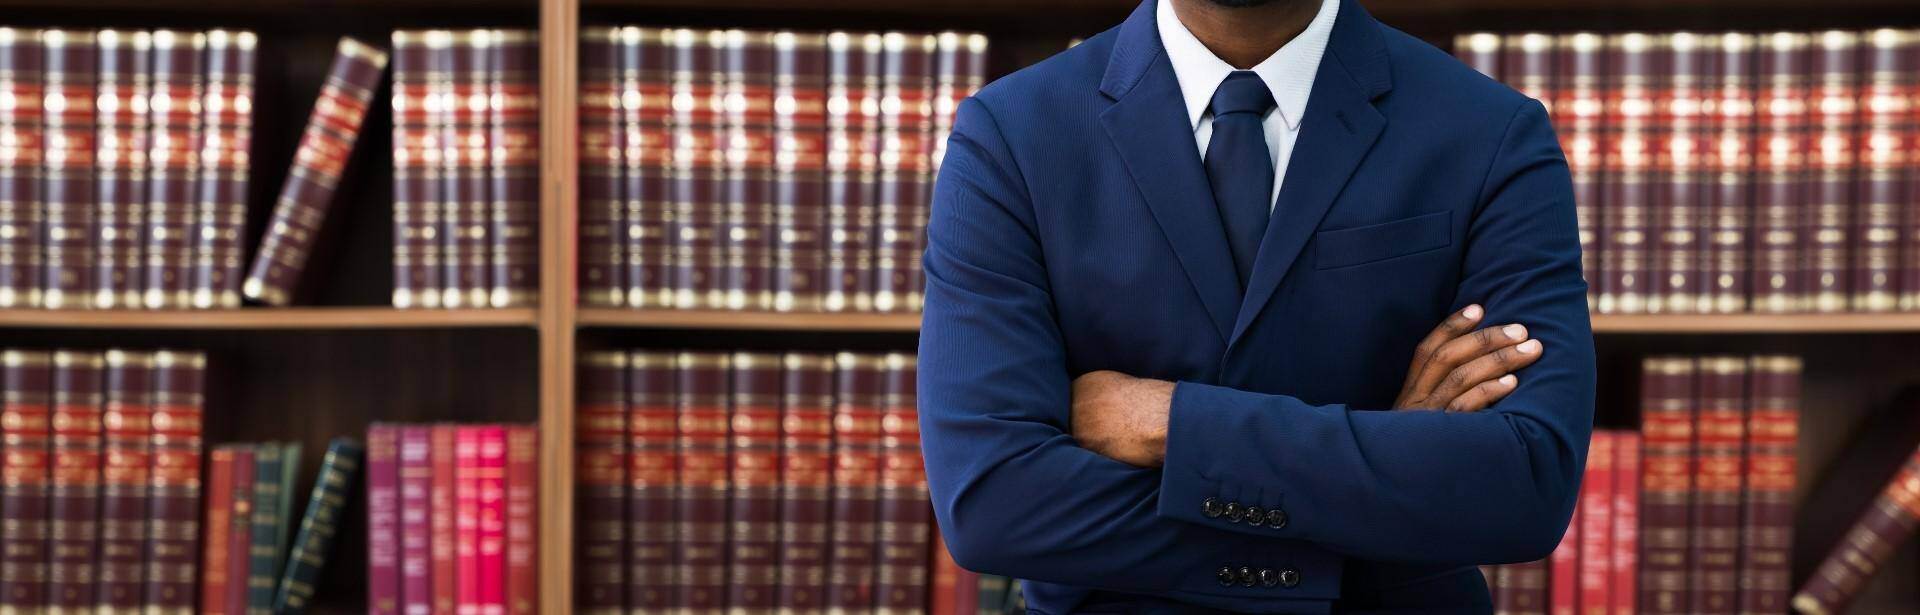 A black lawyer standing in front of a bookshelf of law book in Smyrna, Georgia